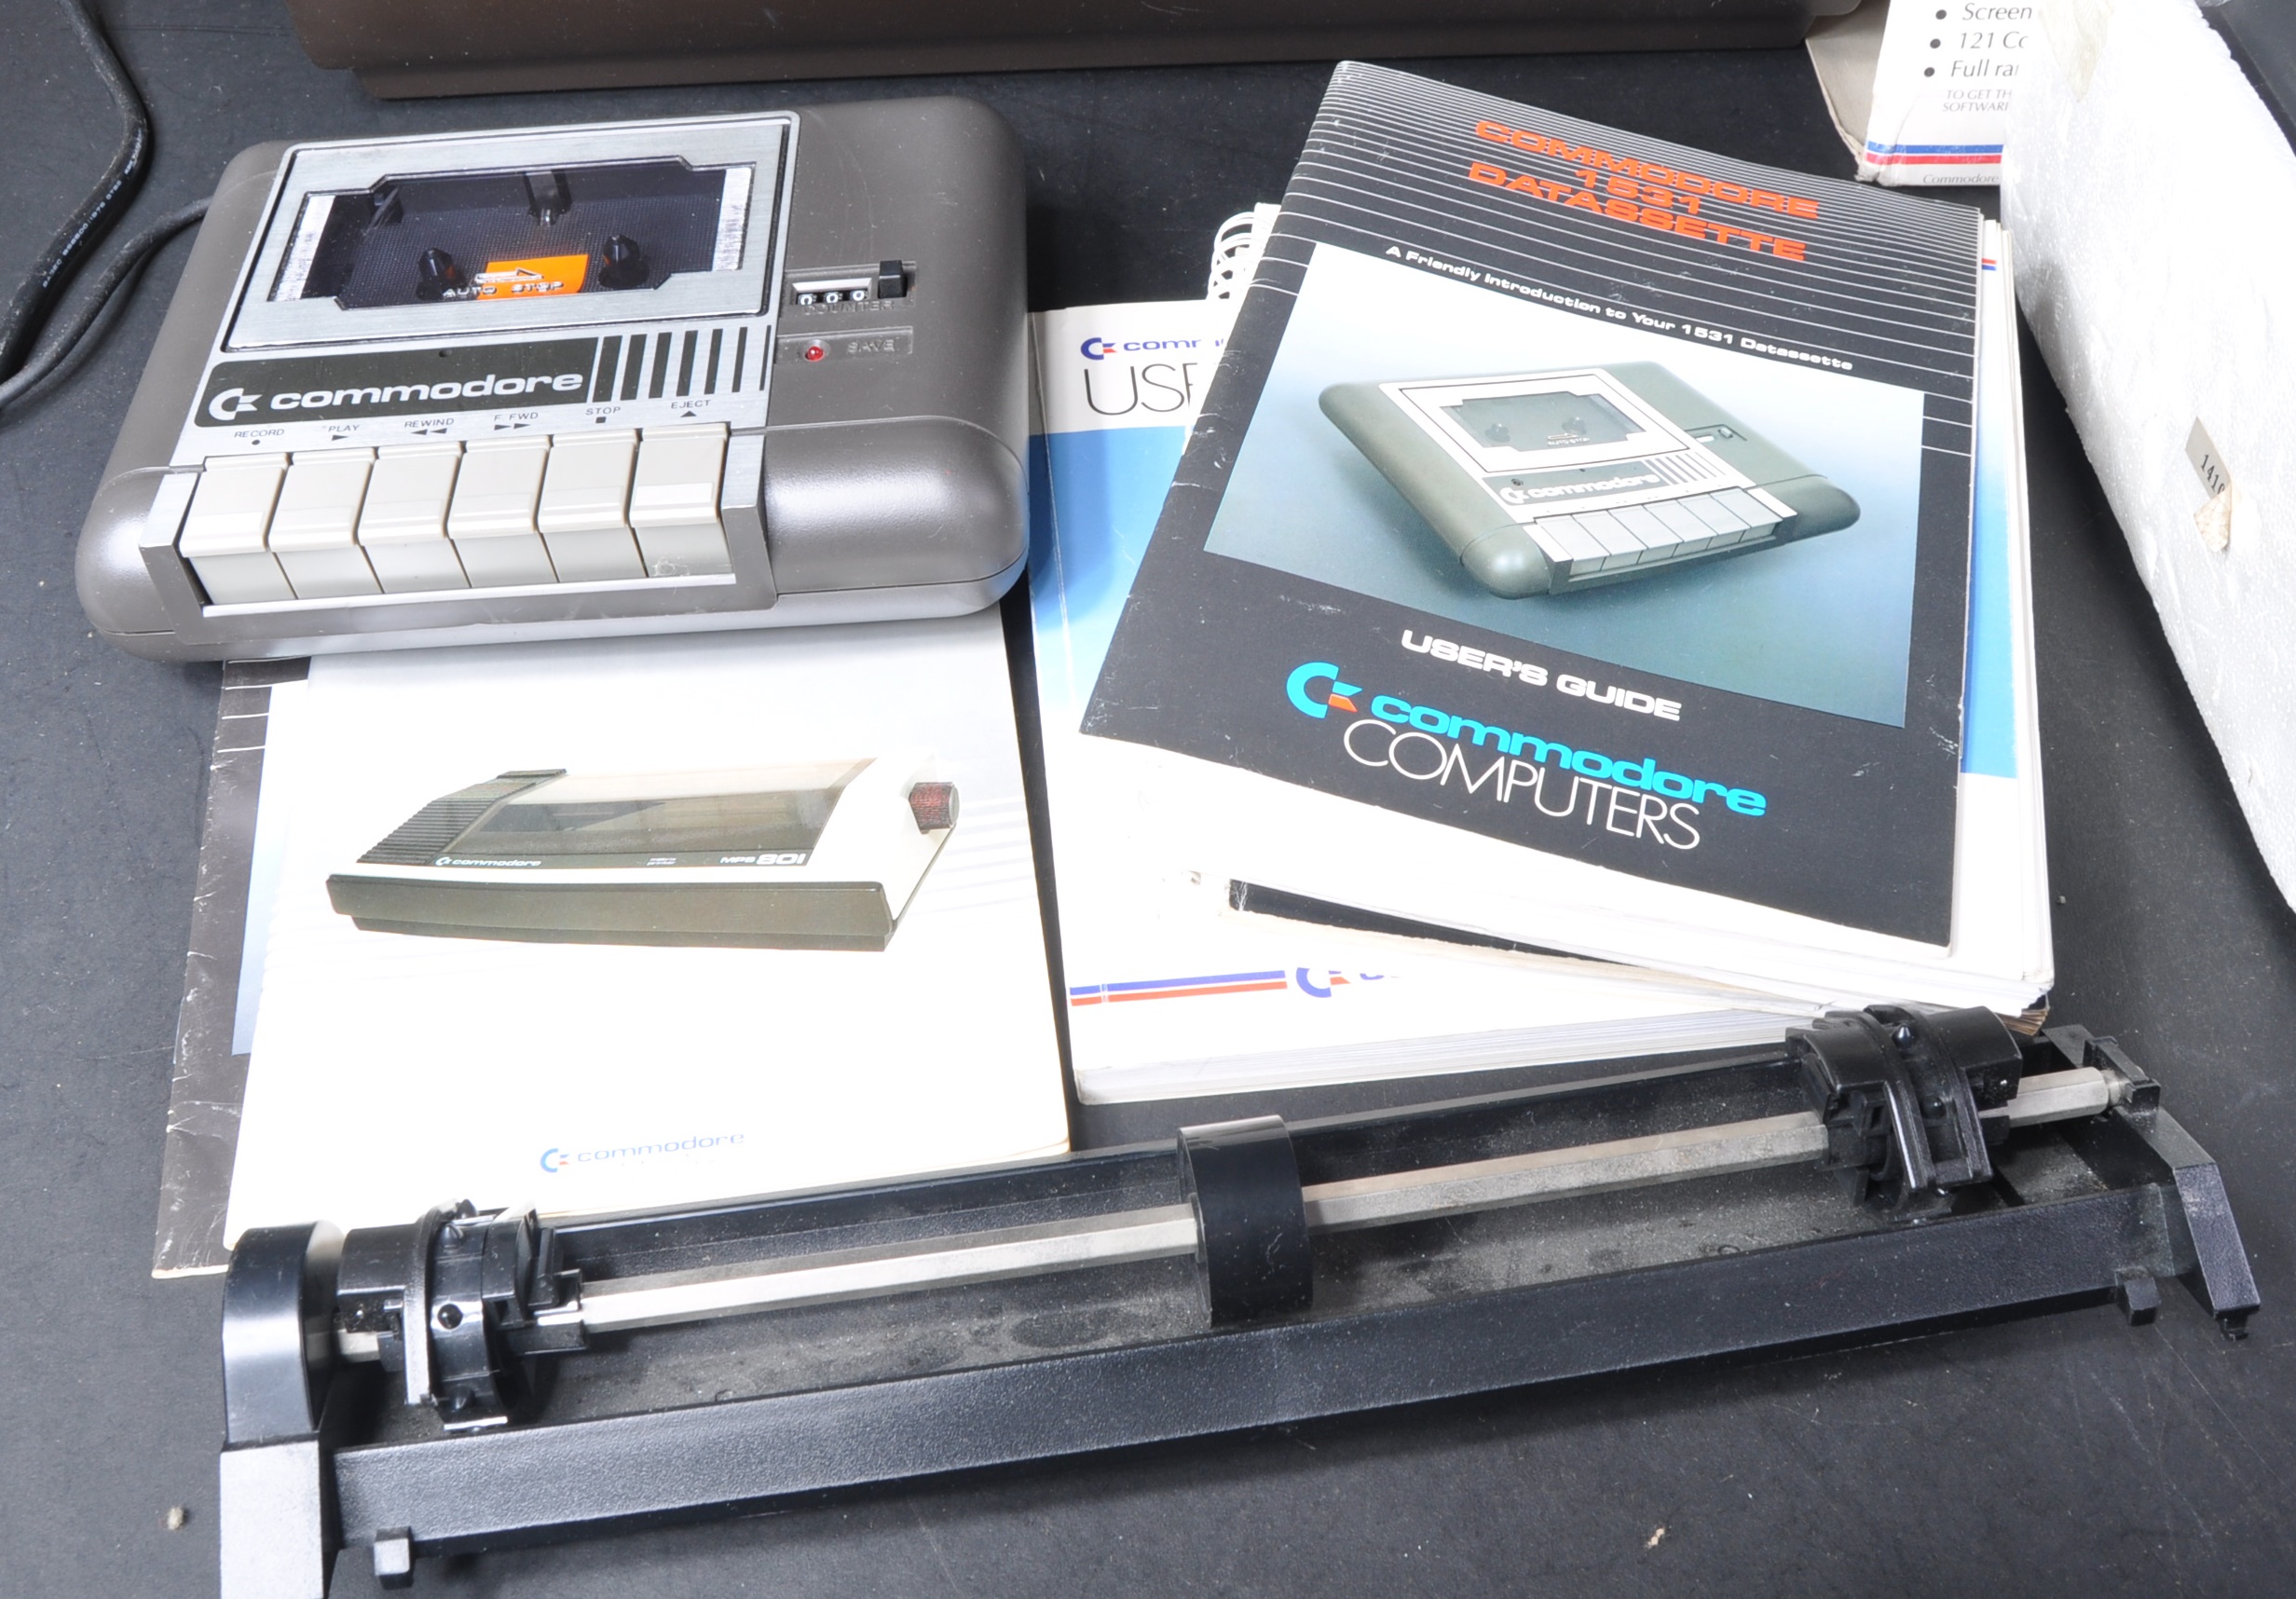 RETRO GAMING - COMMODORE PLUS 4 HOME COMPUTER WITH PRINTER - Image 5 of 6